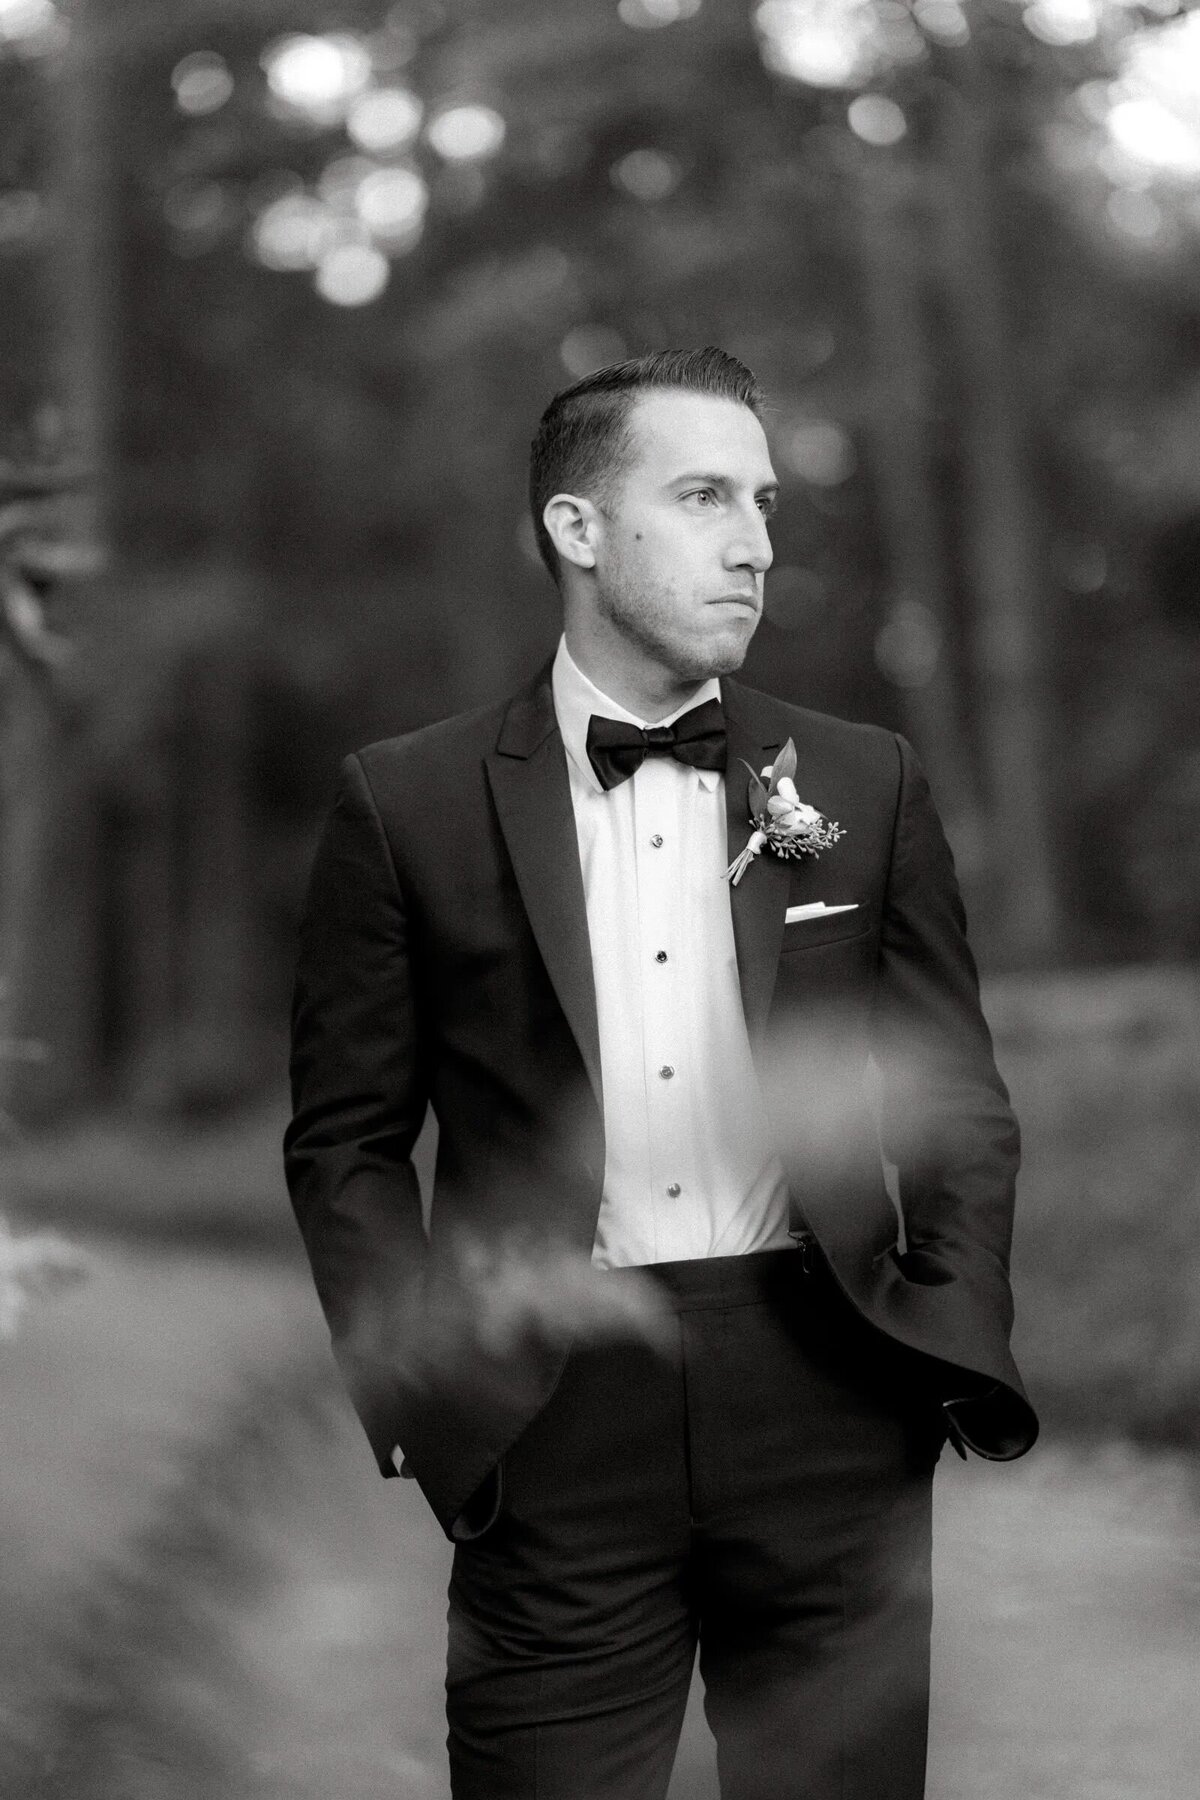 A groom in a black tuxedo and bow tie looking contemplative in a forested path, captured in a black and white portrait.